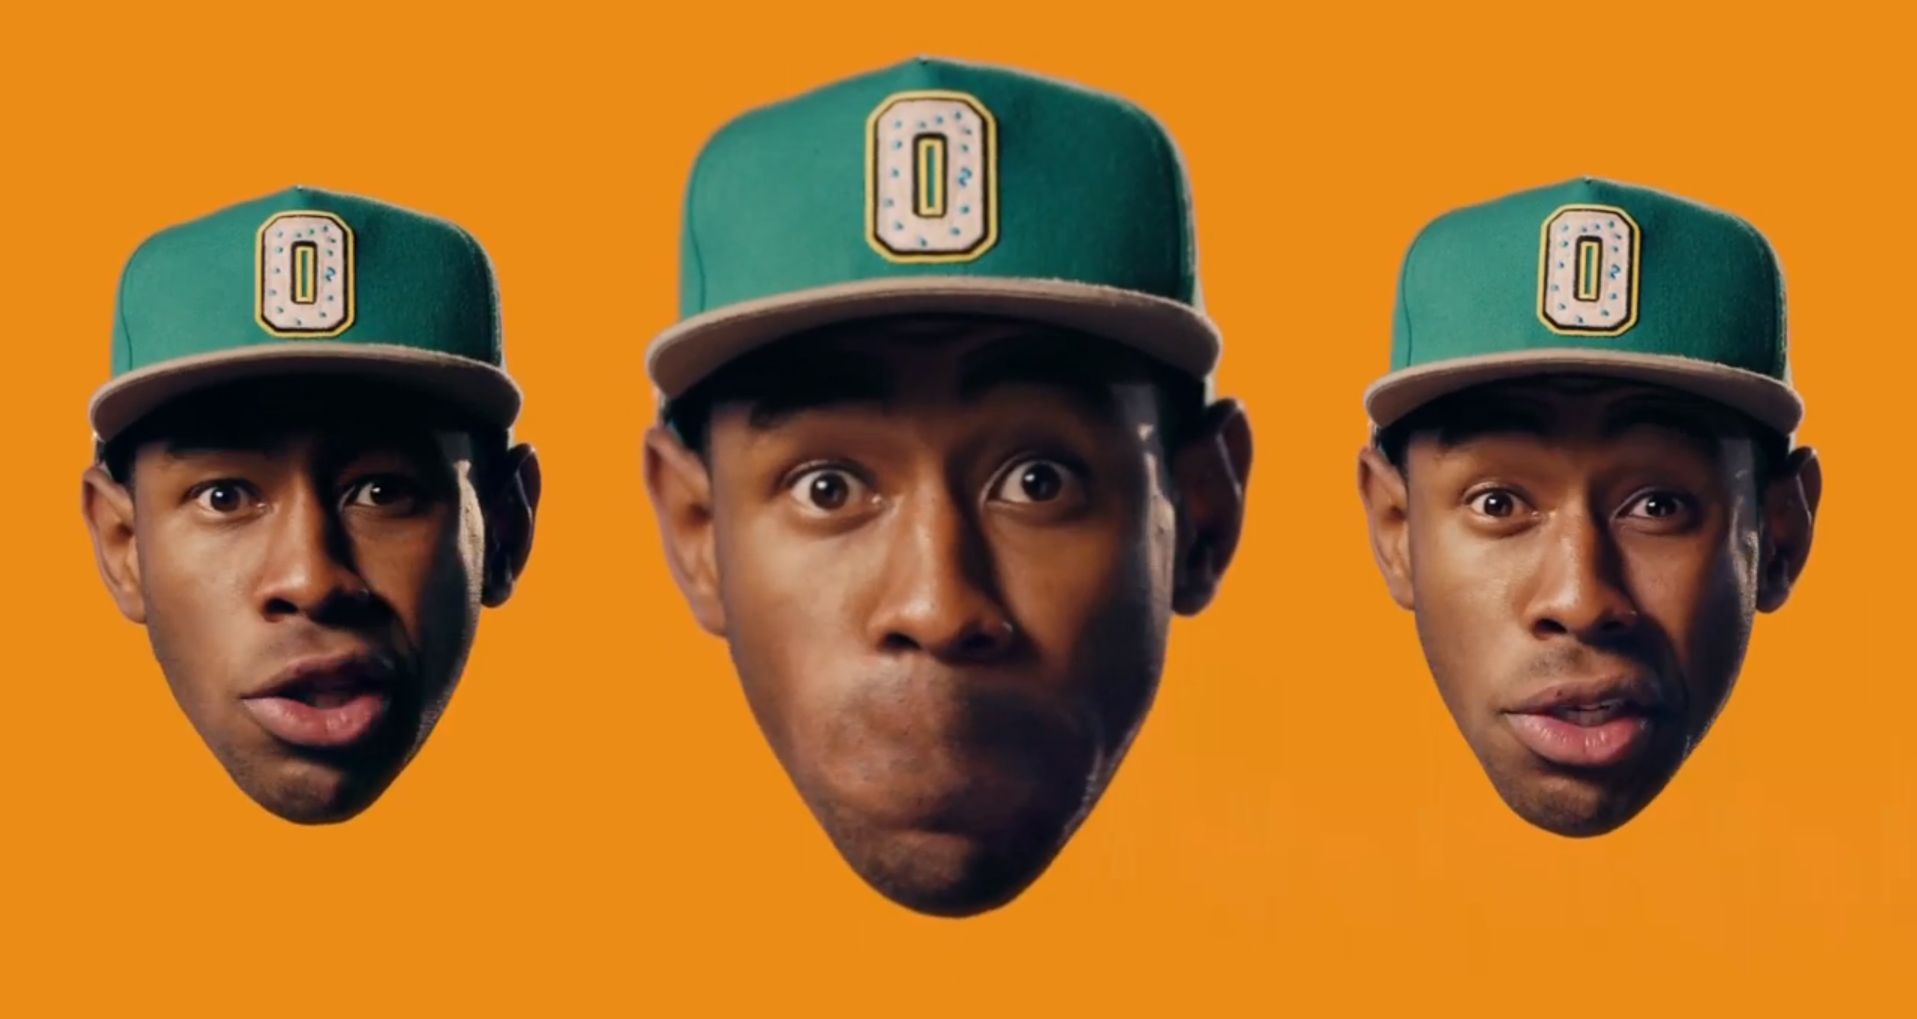 Tyler the Creator Orange 3 Head background for your phone iPhone